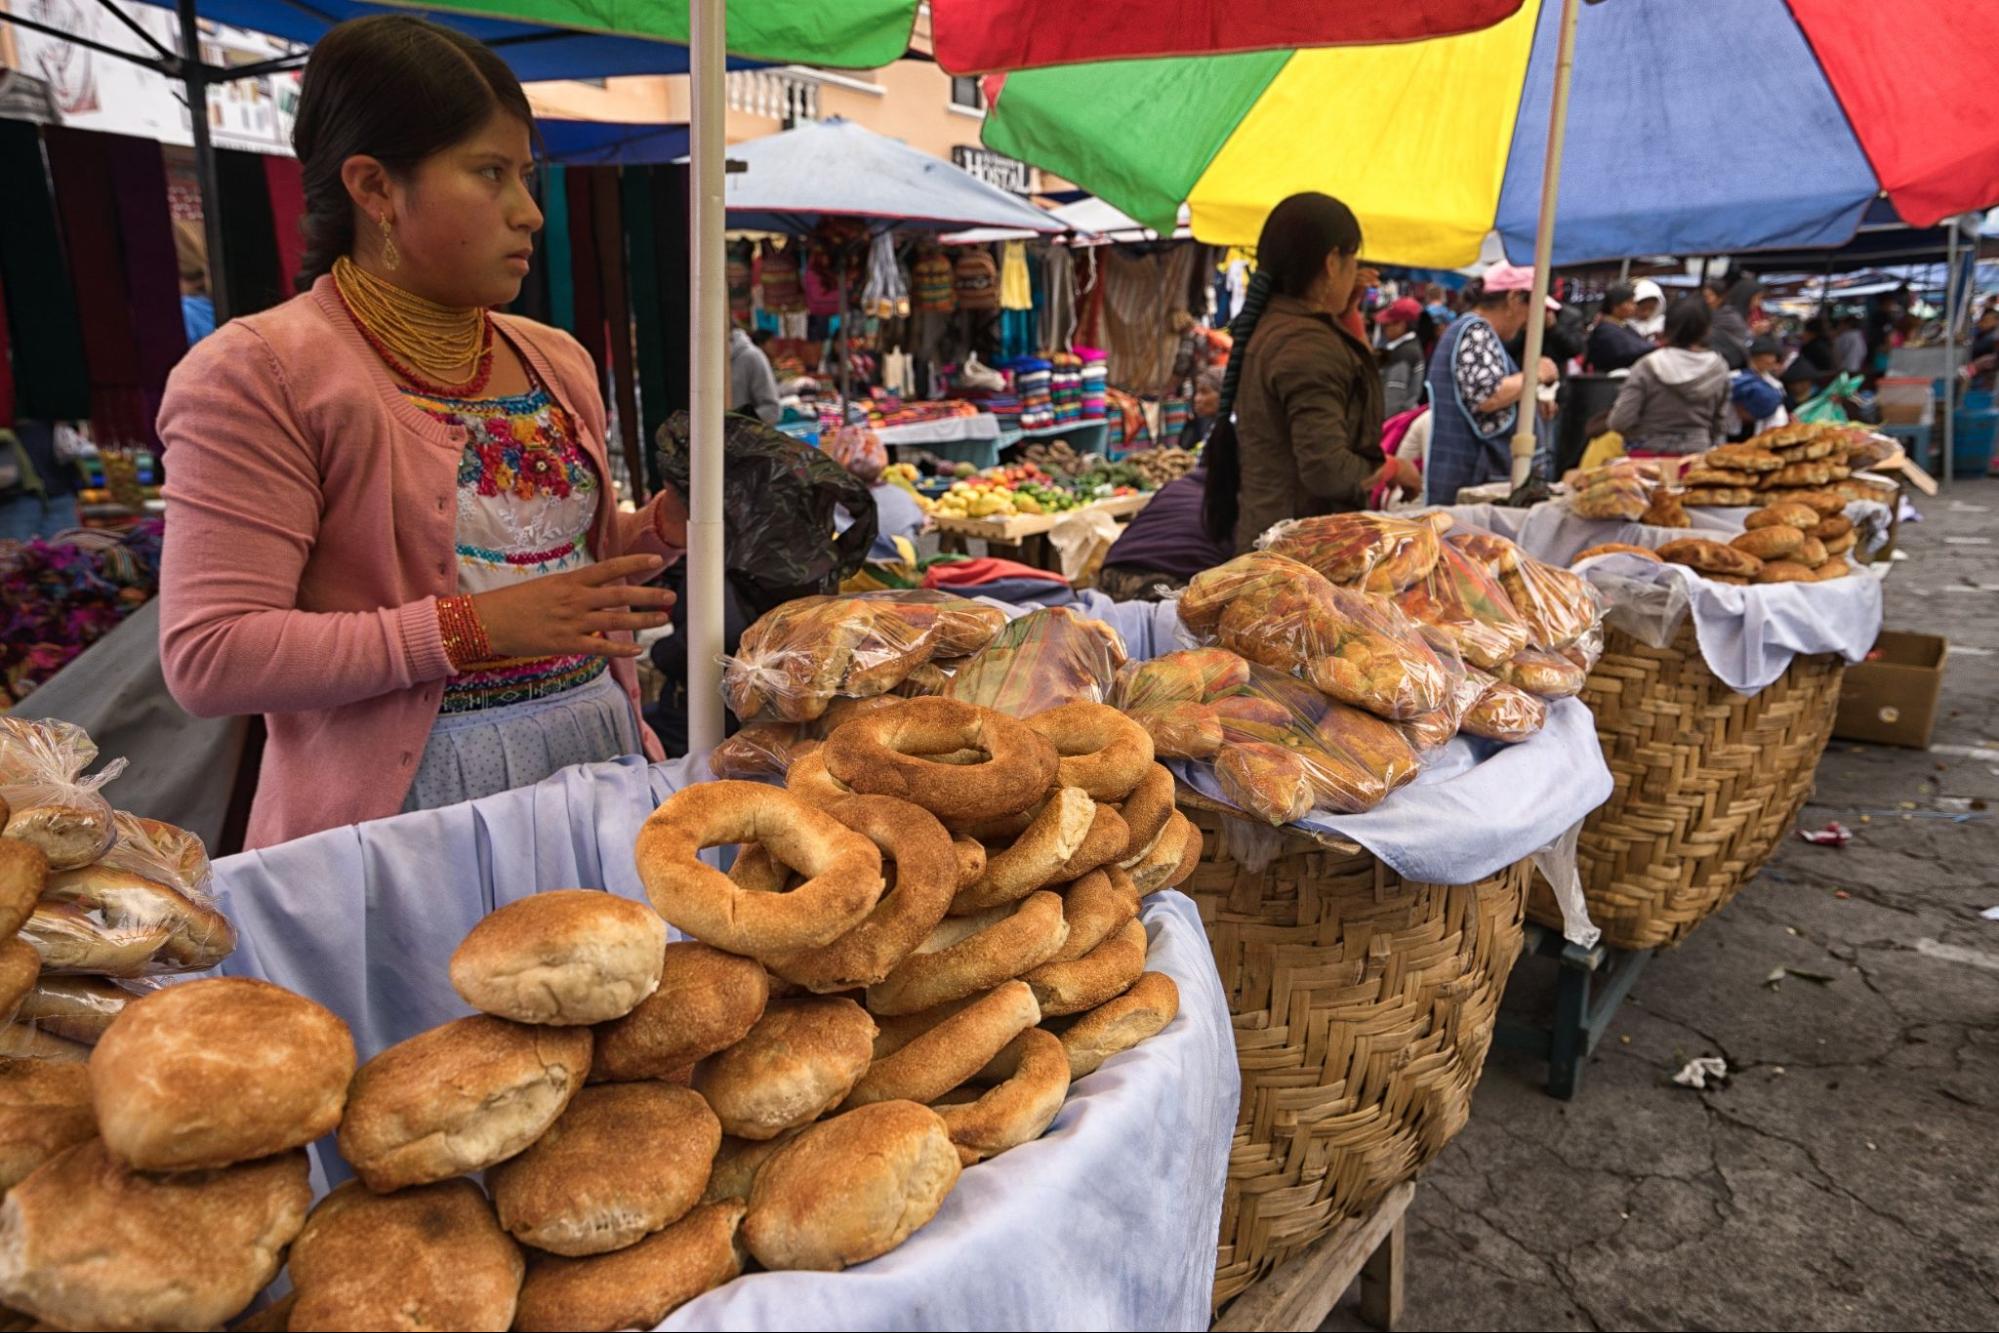 indigenous quechua women selling bakery products in the Saturday farmer's market